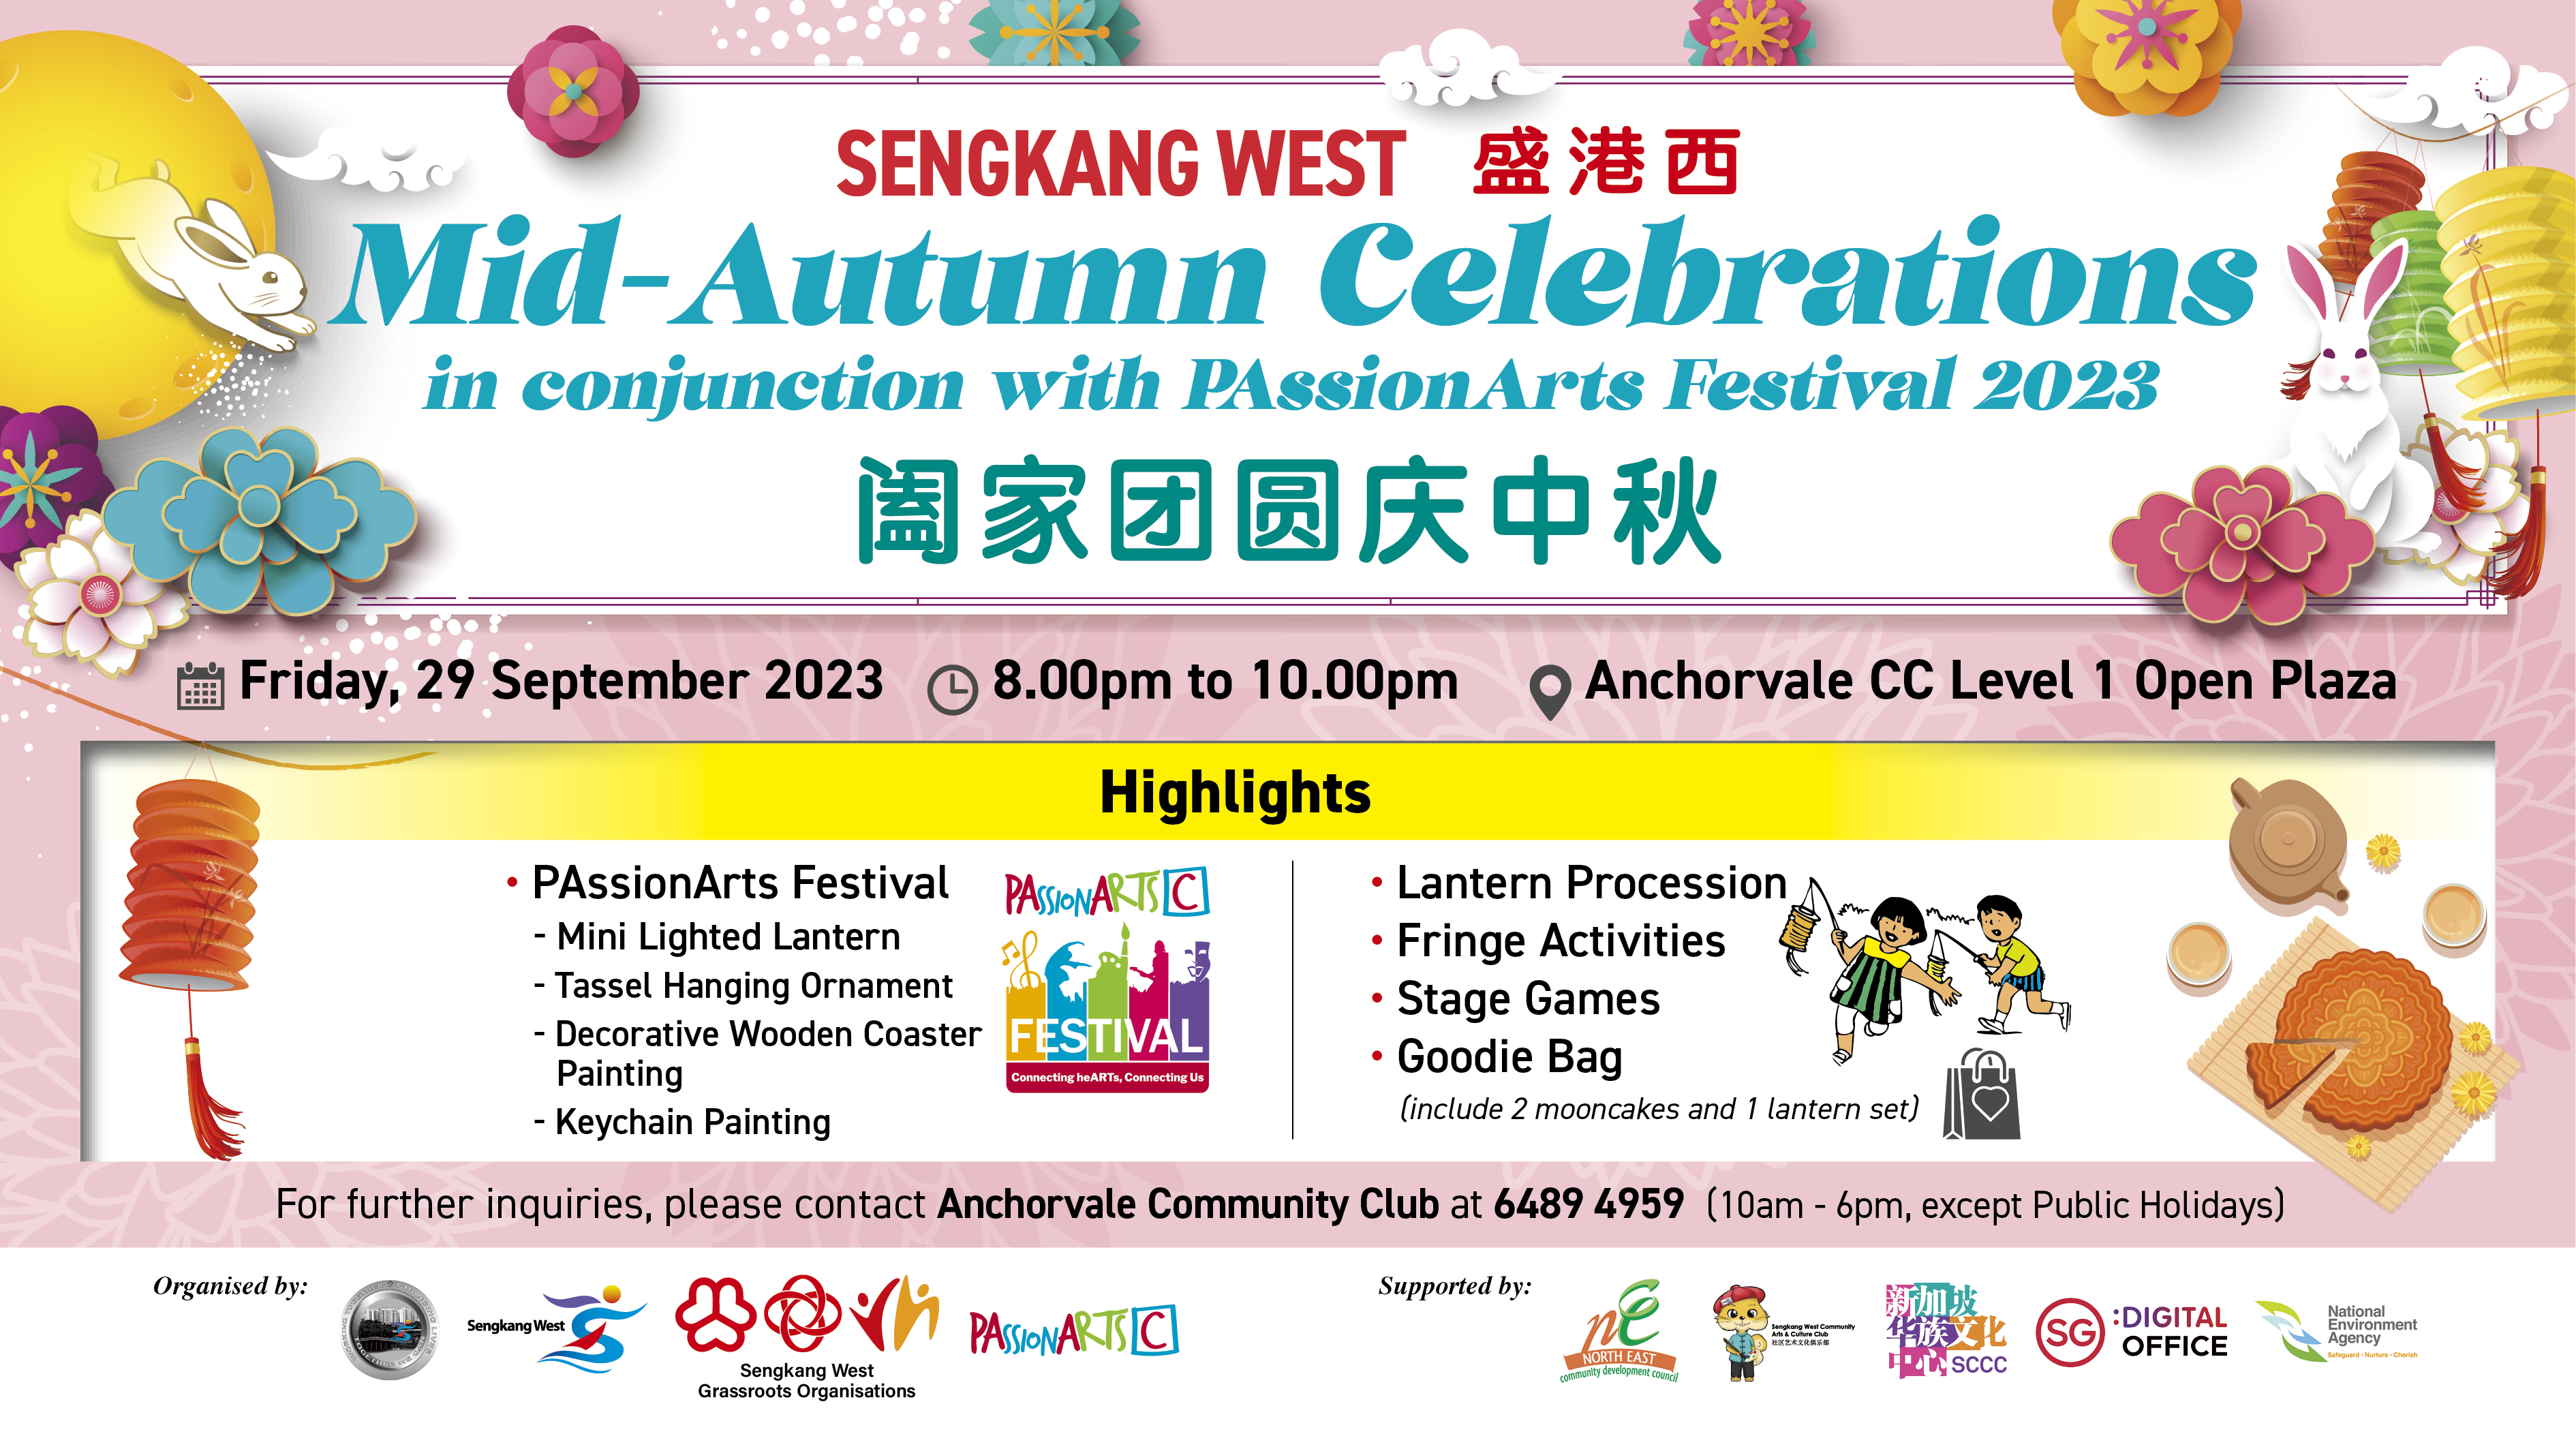 Sengkang West Mid-Autumn Celebrations in conjunction with PAssionArts Festival 2023